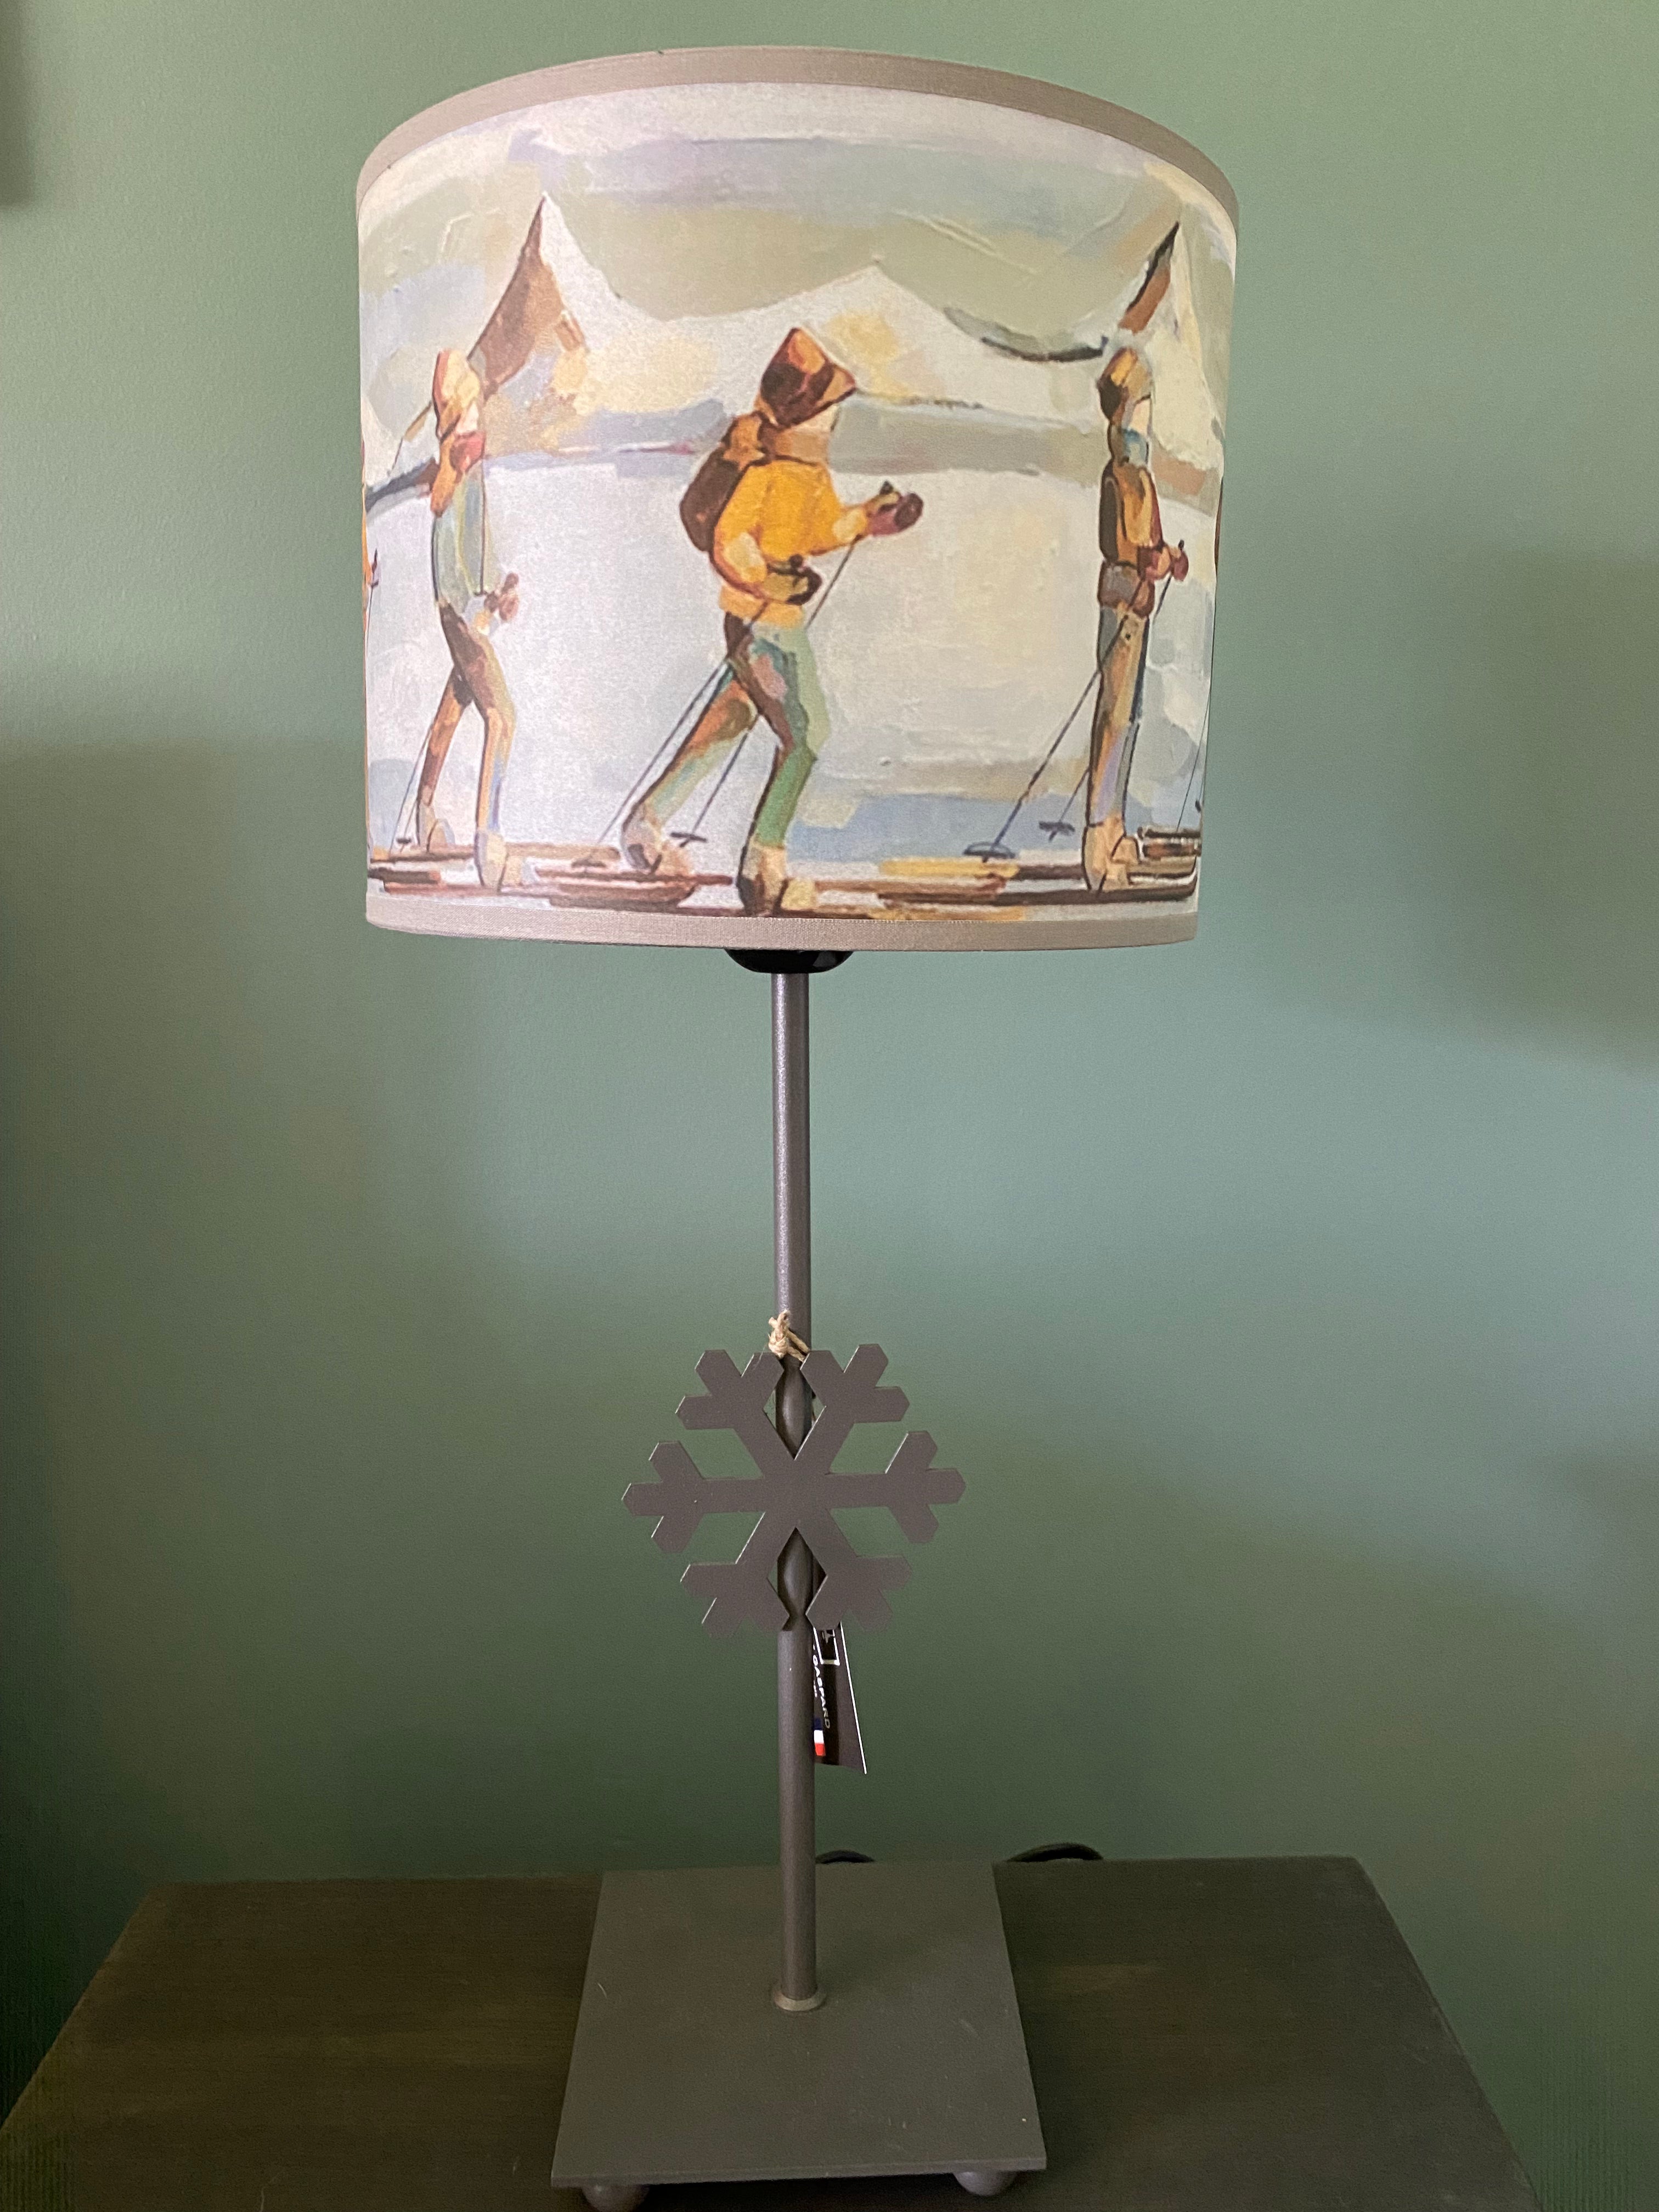 lamp with a square grey solid metal base supporting a rod with ca snowflake mid way up the rod, topped by a colourful canvas lamp shade. The shade depicts people on skis skinning across the snow in a line, one in front of the other, with snow capped mountains in the background. Sitting on a wooden table behind a green wall. Different view of shade, again